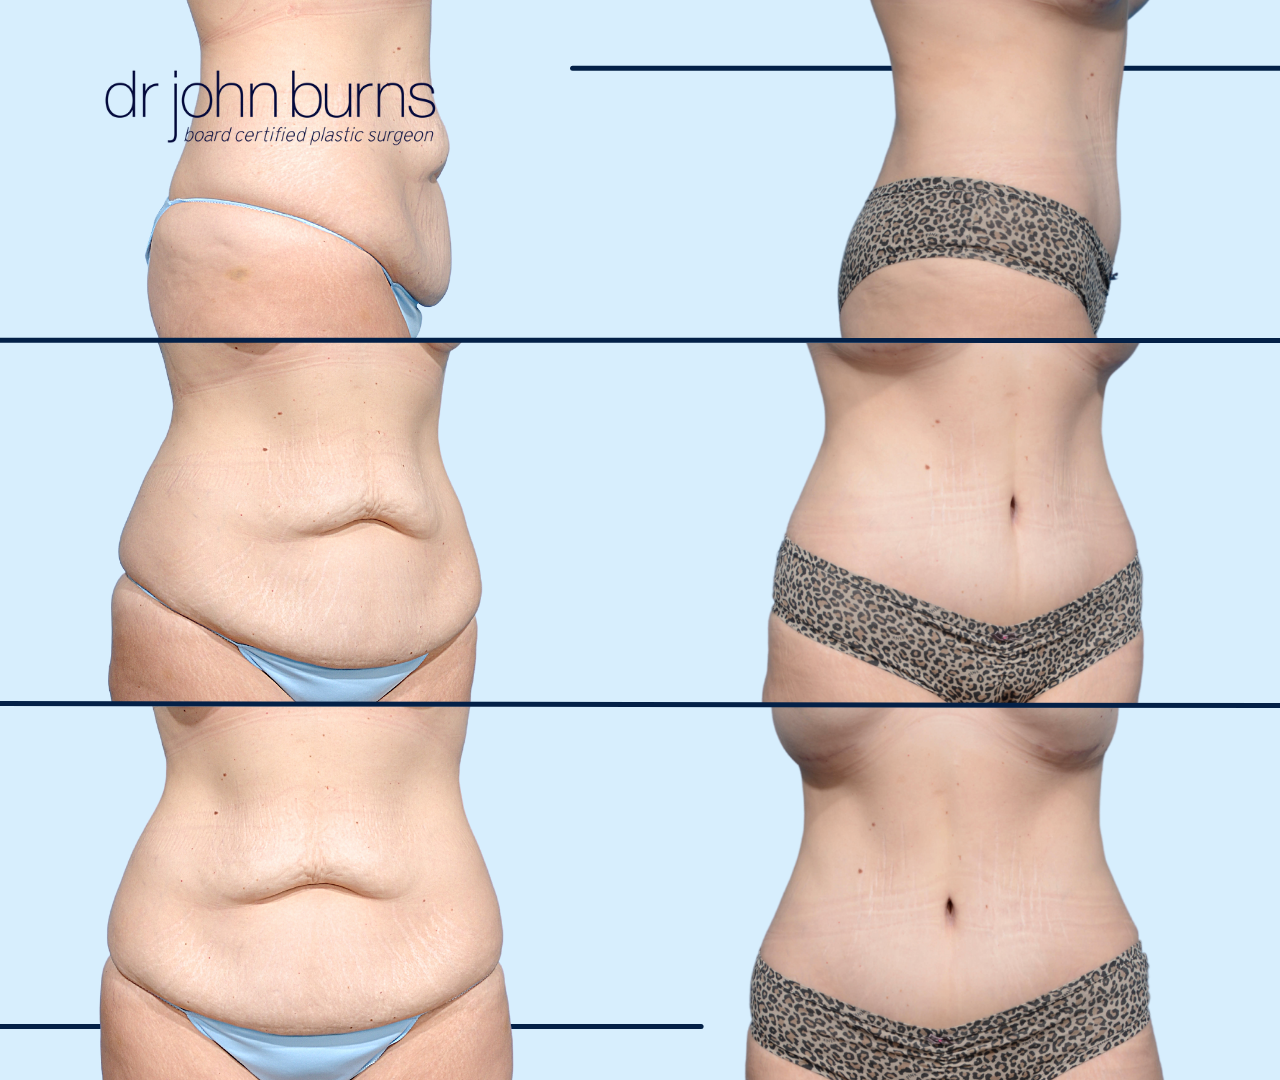 Tummy tuck results 🔥 @drzhzps performed a full tummy tuck with